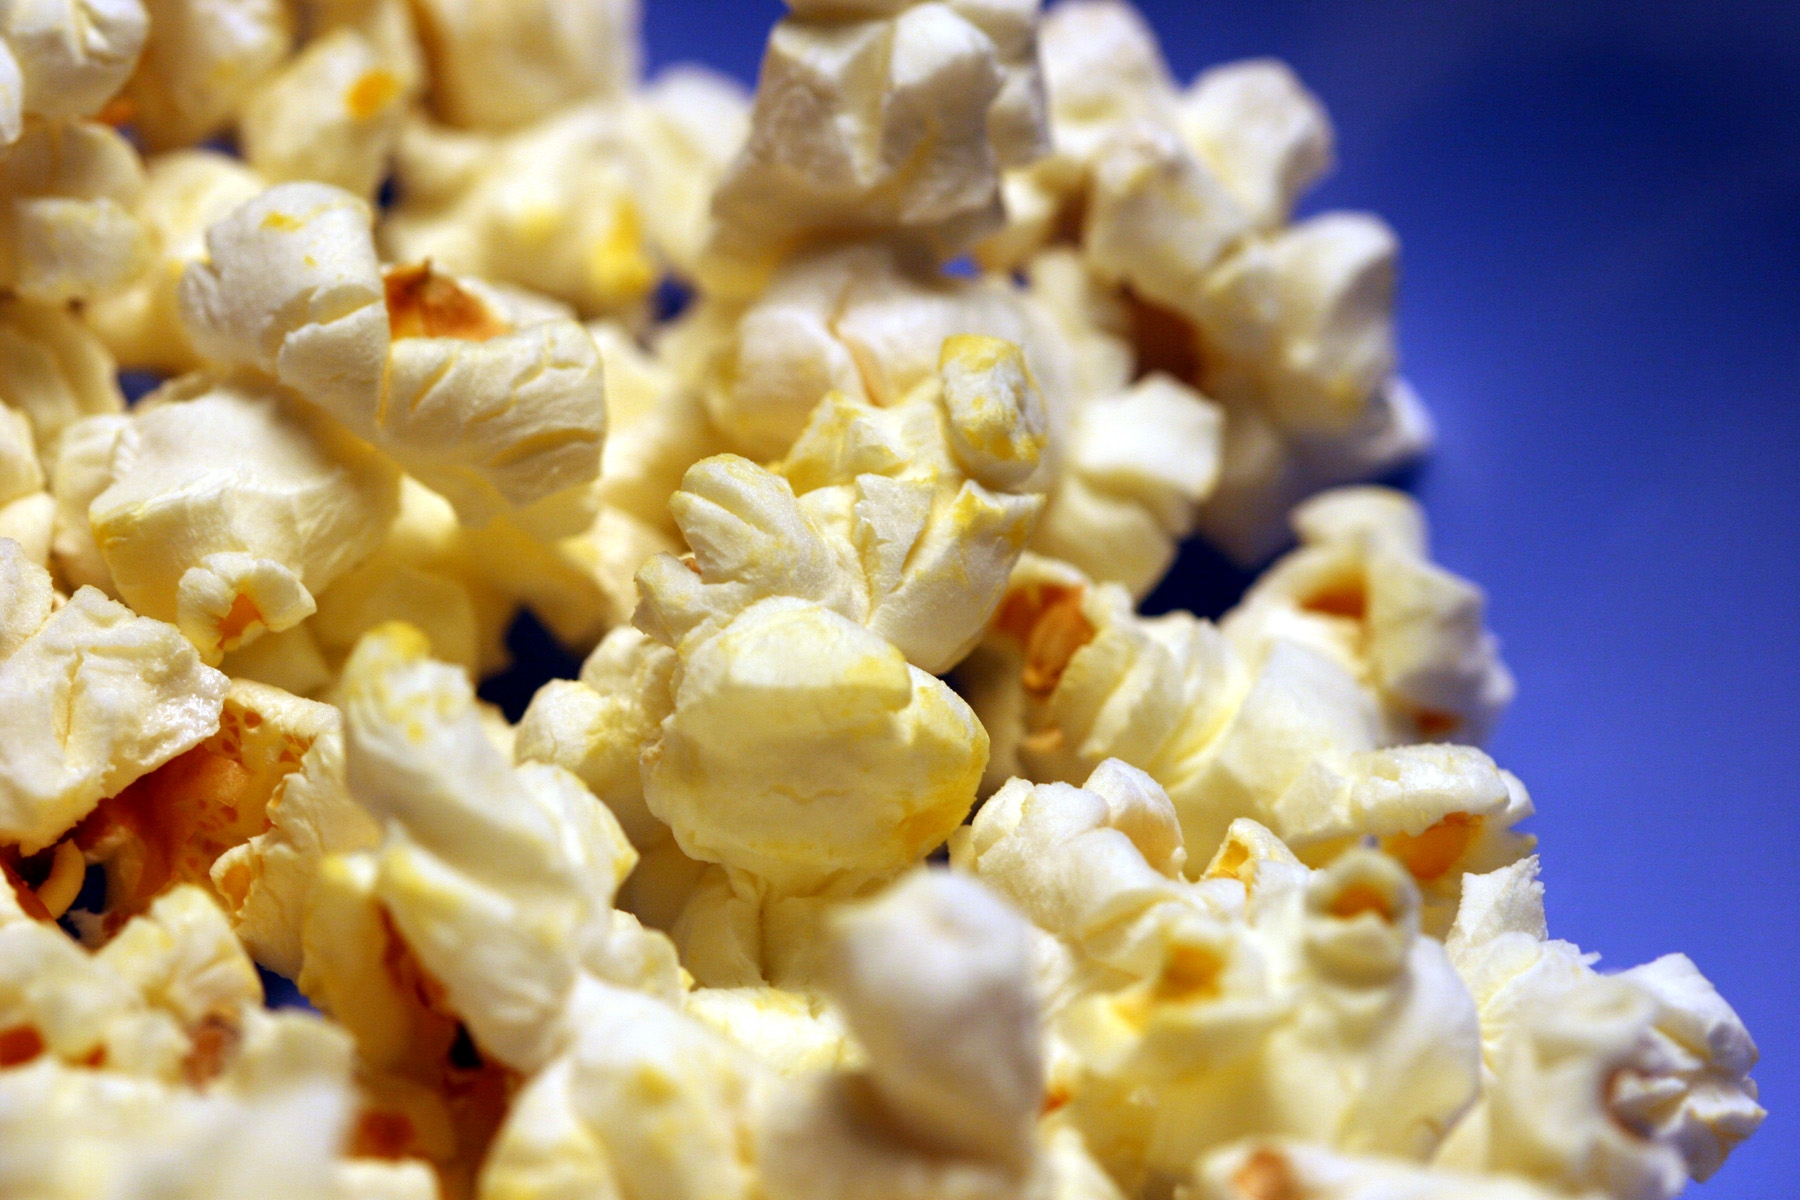 Could microwave popcorn cause Alzheimer’s? | Alzheimers and Dementia